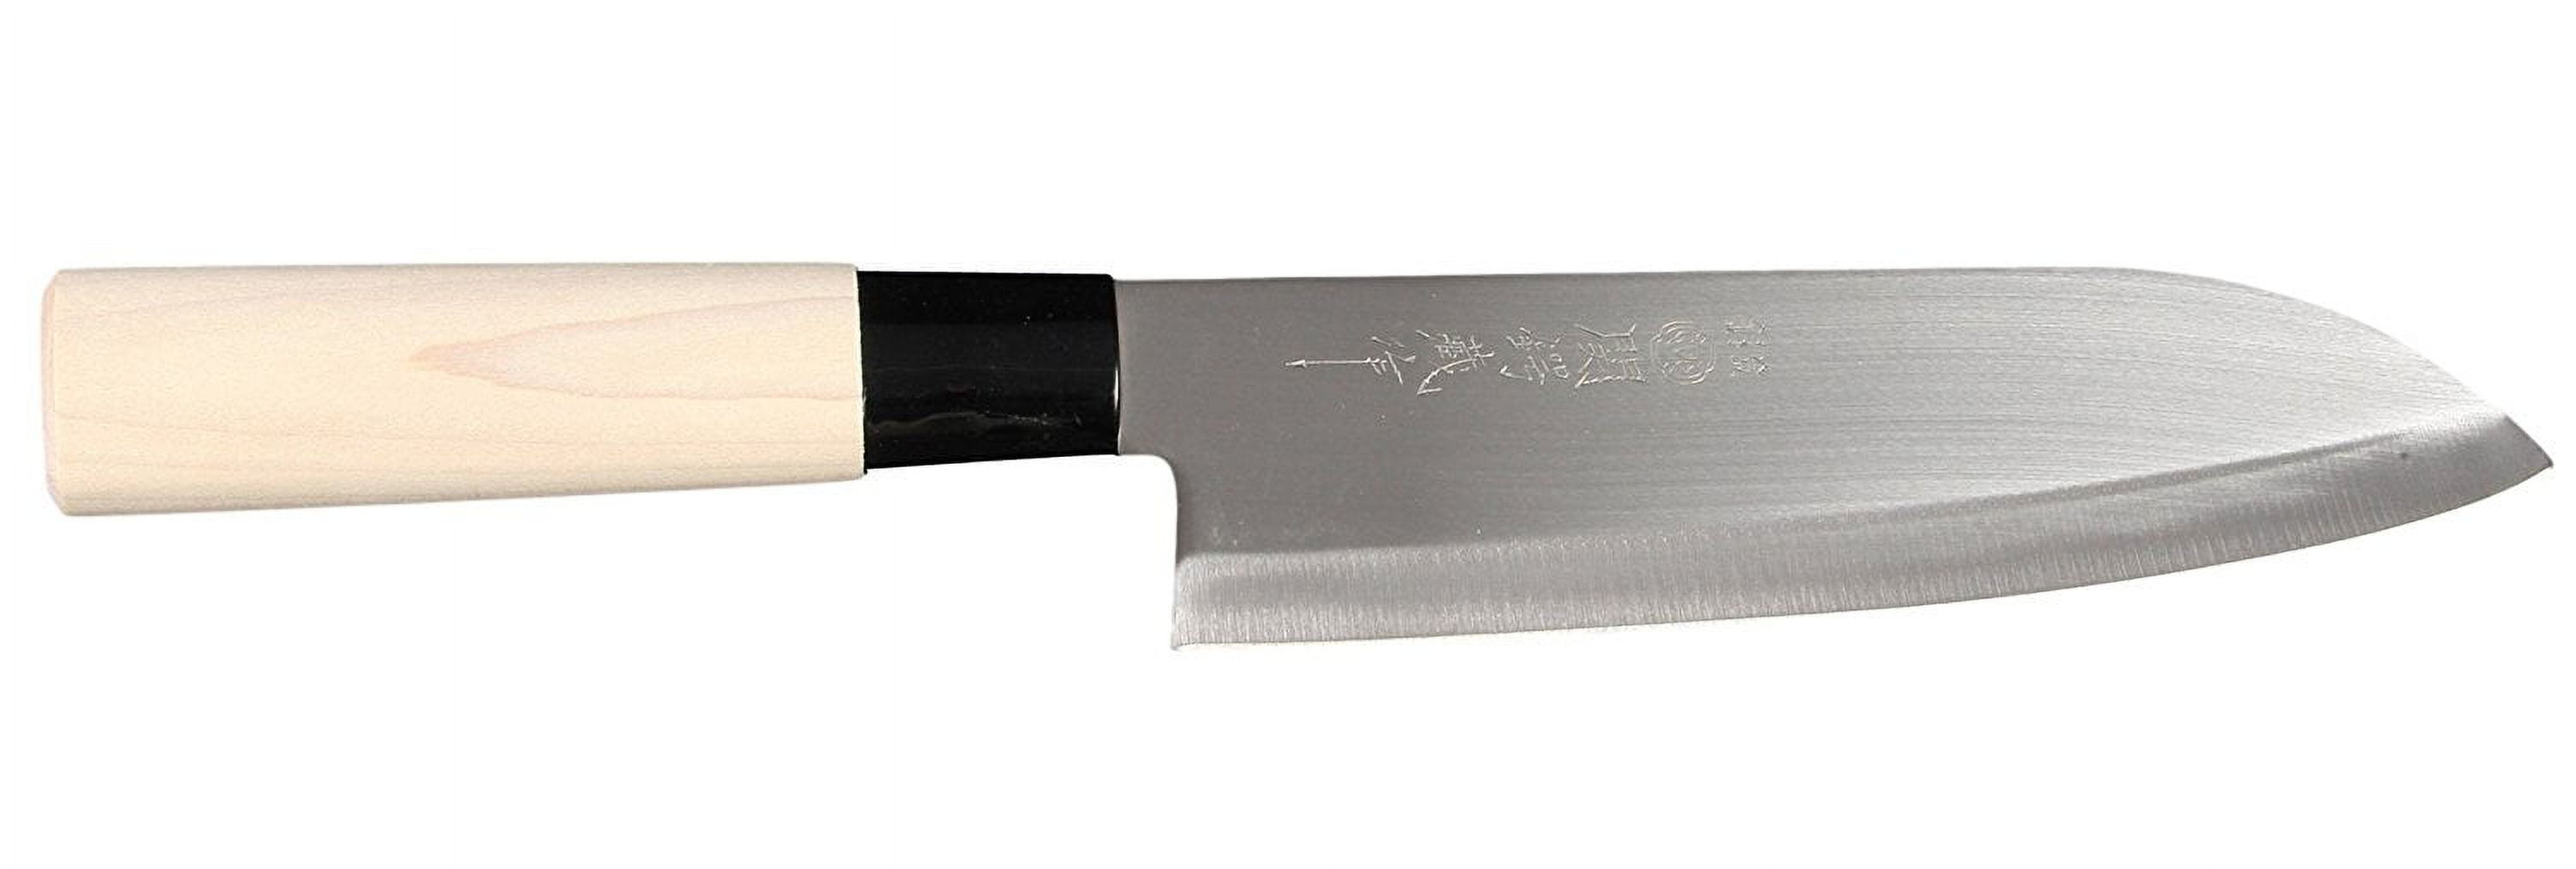 Matsato Kitchen Knife - Perfect for cutting, boning, and chopping needs.  Designed for balance and control, blending modern style with traditional